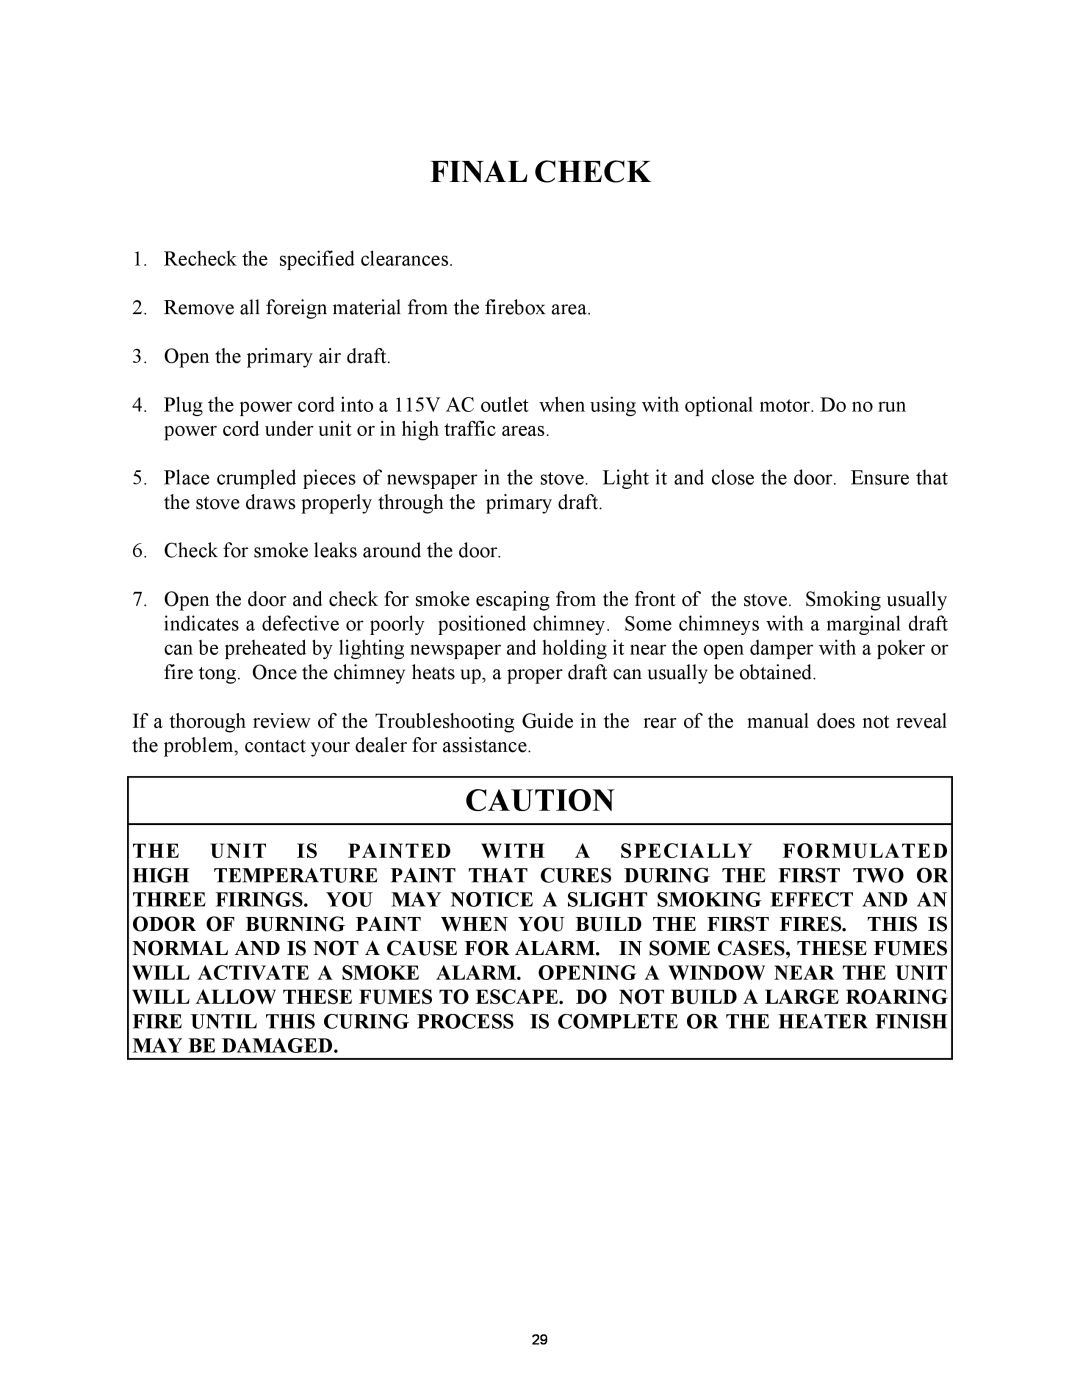 New Buck Corporation 74 installation instructions Final Check, Recheck the specified clearances 